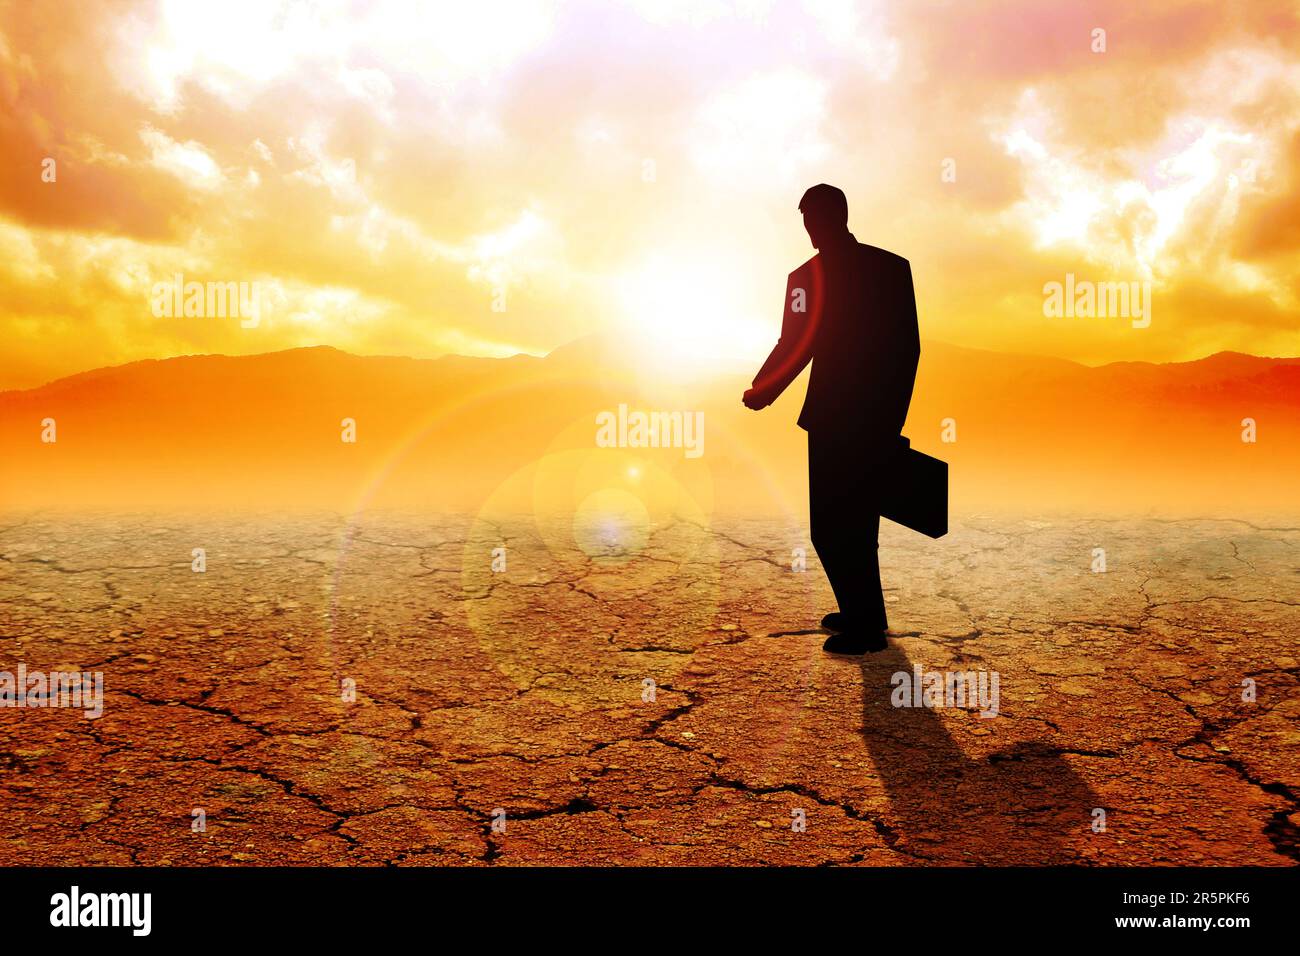 Silhouette illustration of a man with suitcase walking on dry land Stock Photo